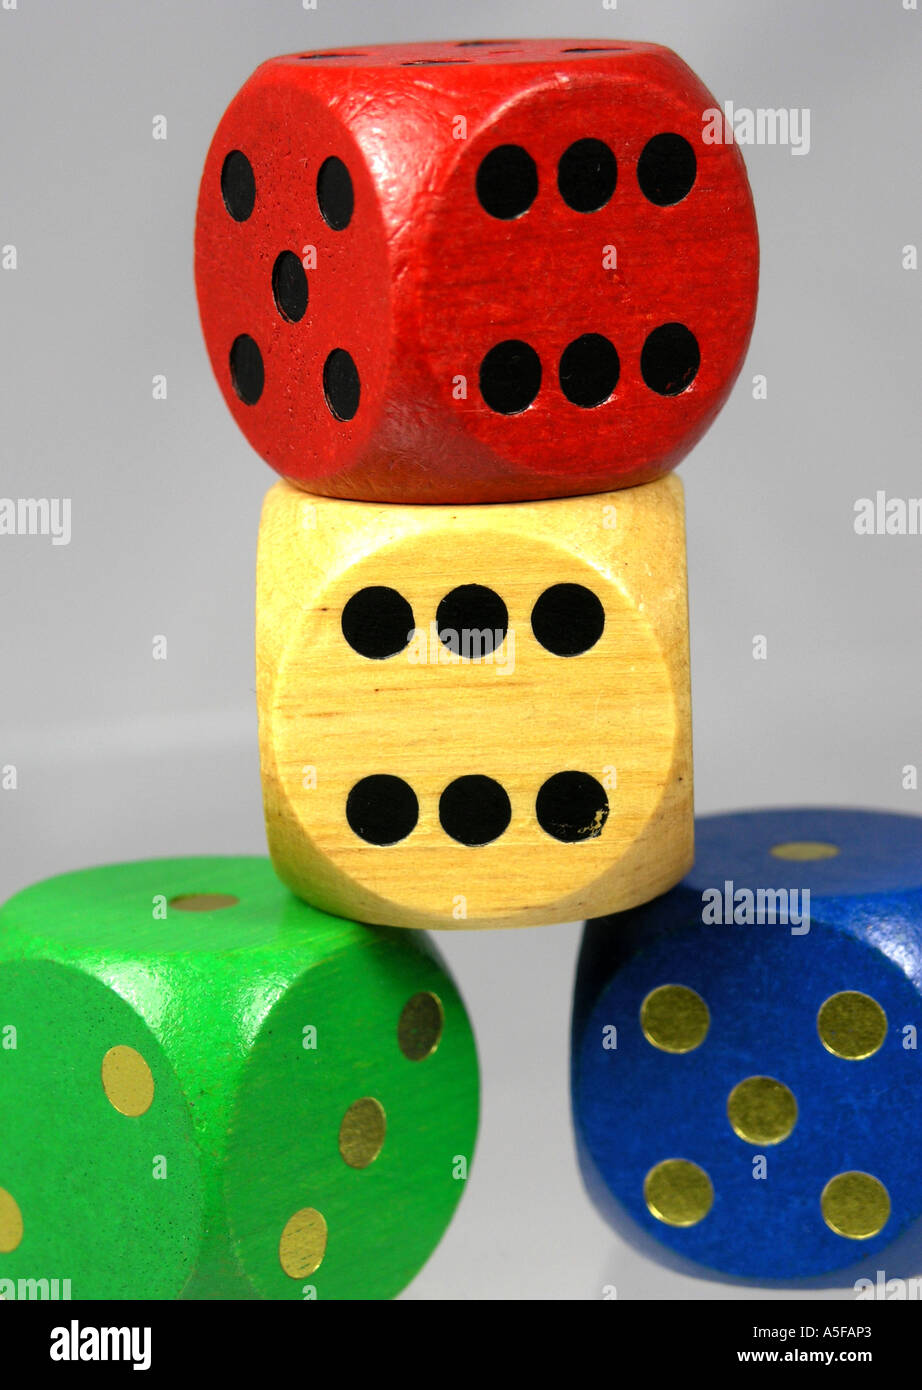 5 Pack NEW Cream Color Dice Poker Dice 